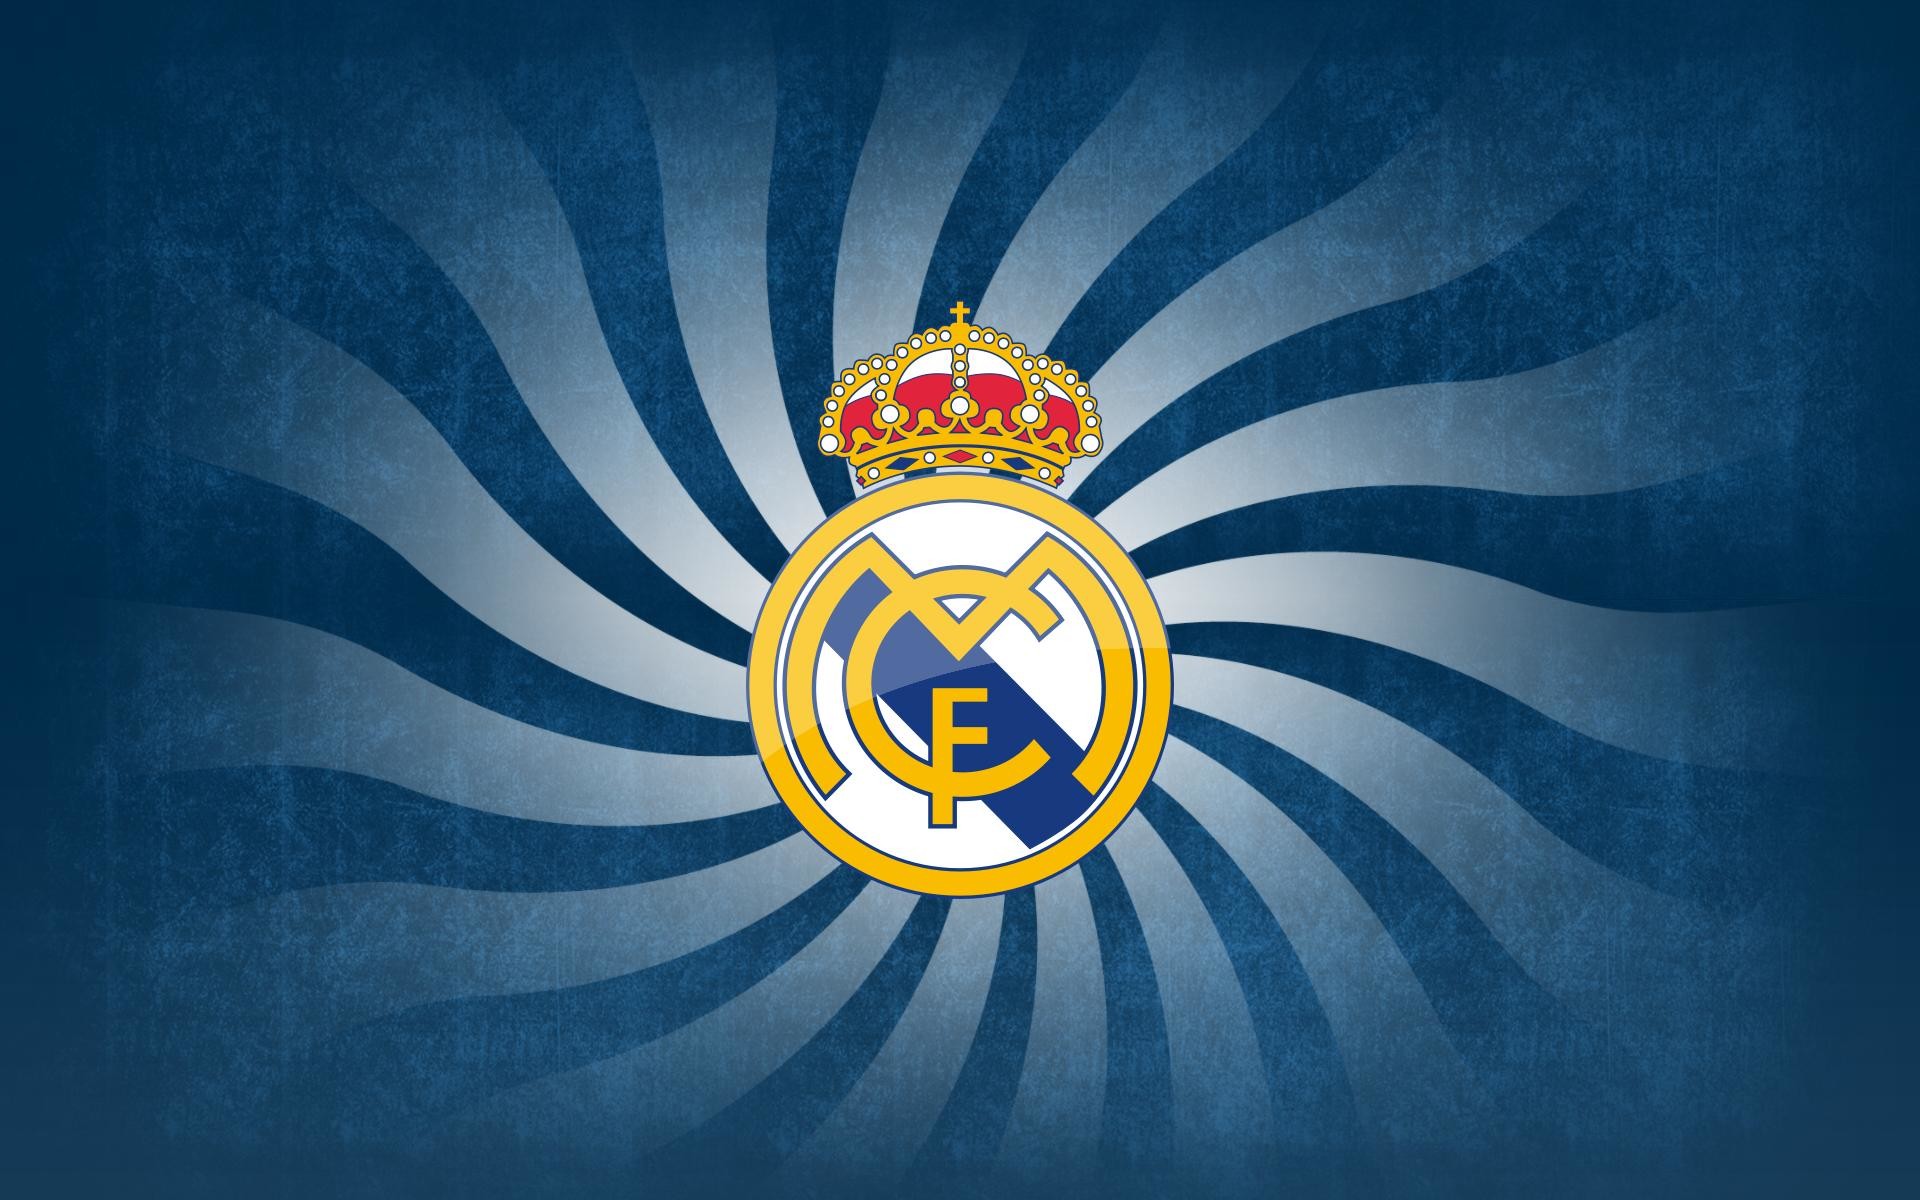 1920x1200 Marcelo photos and wallpapers 2018. This is a logo owned by Real Madrid  Club de FÃºtbol for Real Madrid C.F.. The logo